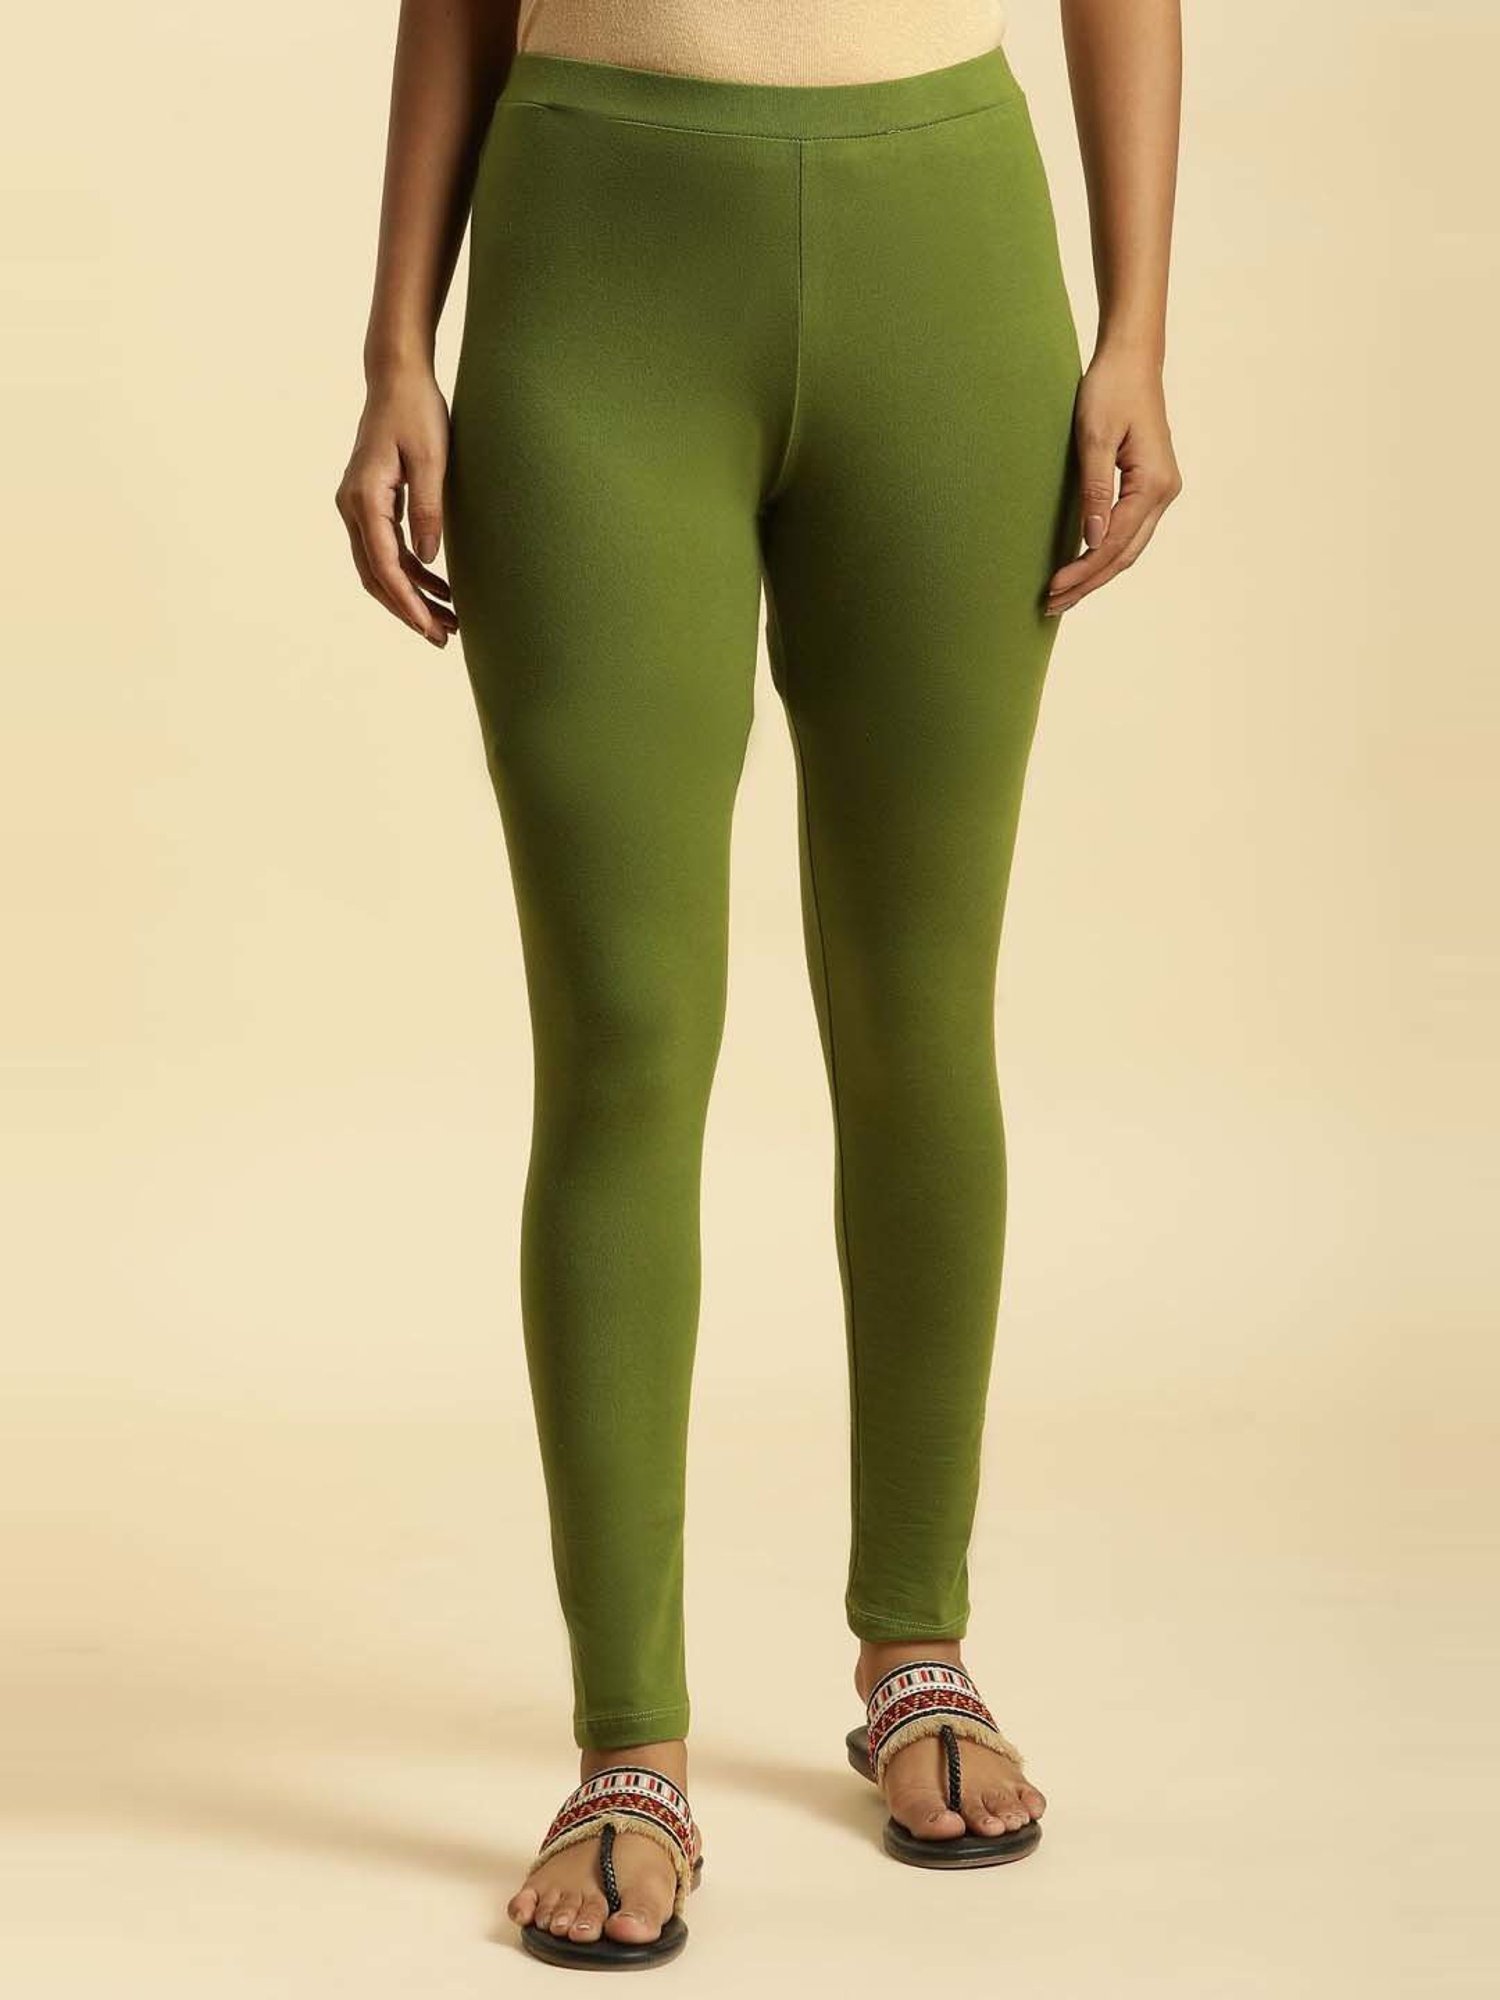 The Tina full length pocket tights - olive green – f-lux.com.au